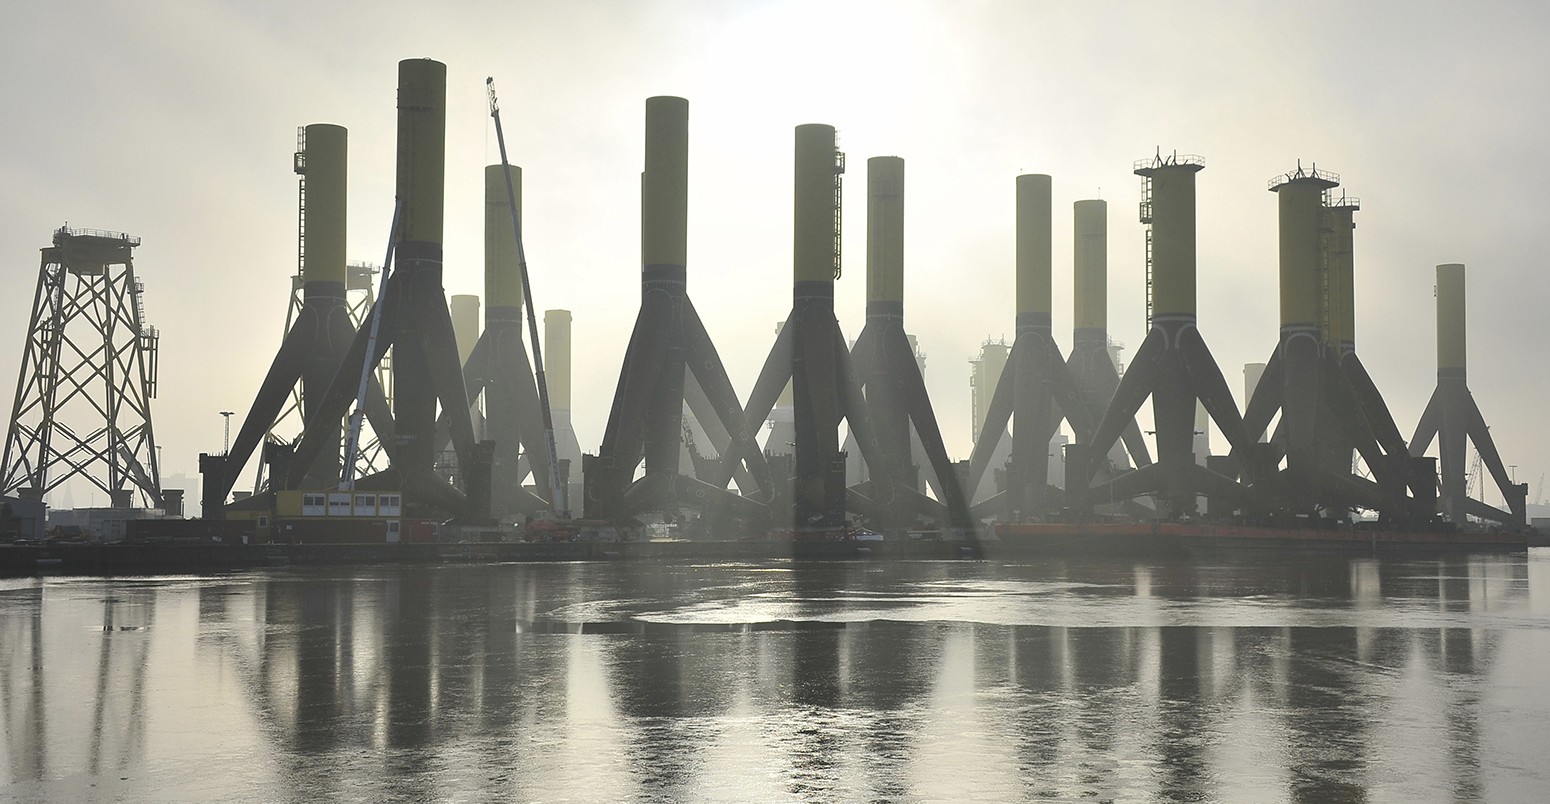 Components for offshore wind turbines, Container Terminal Bremerhaven, Bremerhaven, Bremen, Germany, Europe